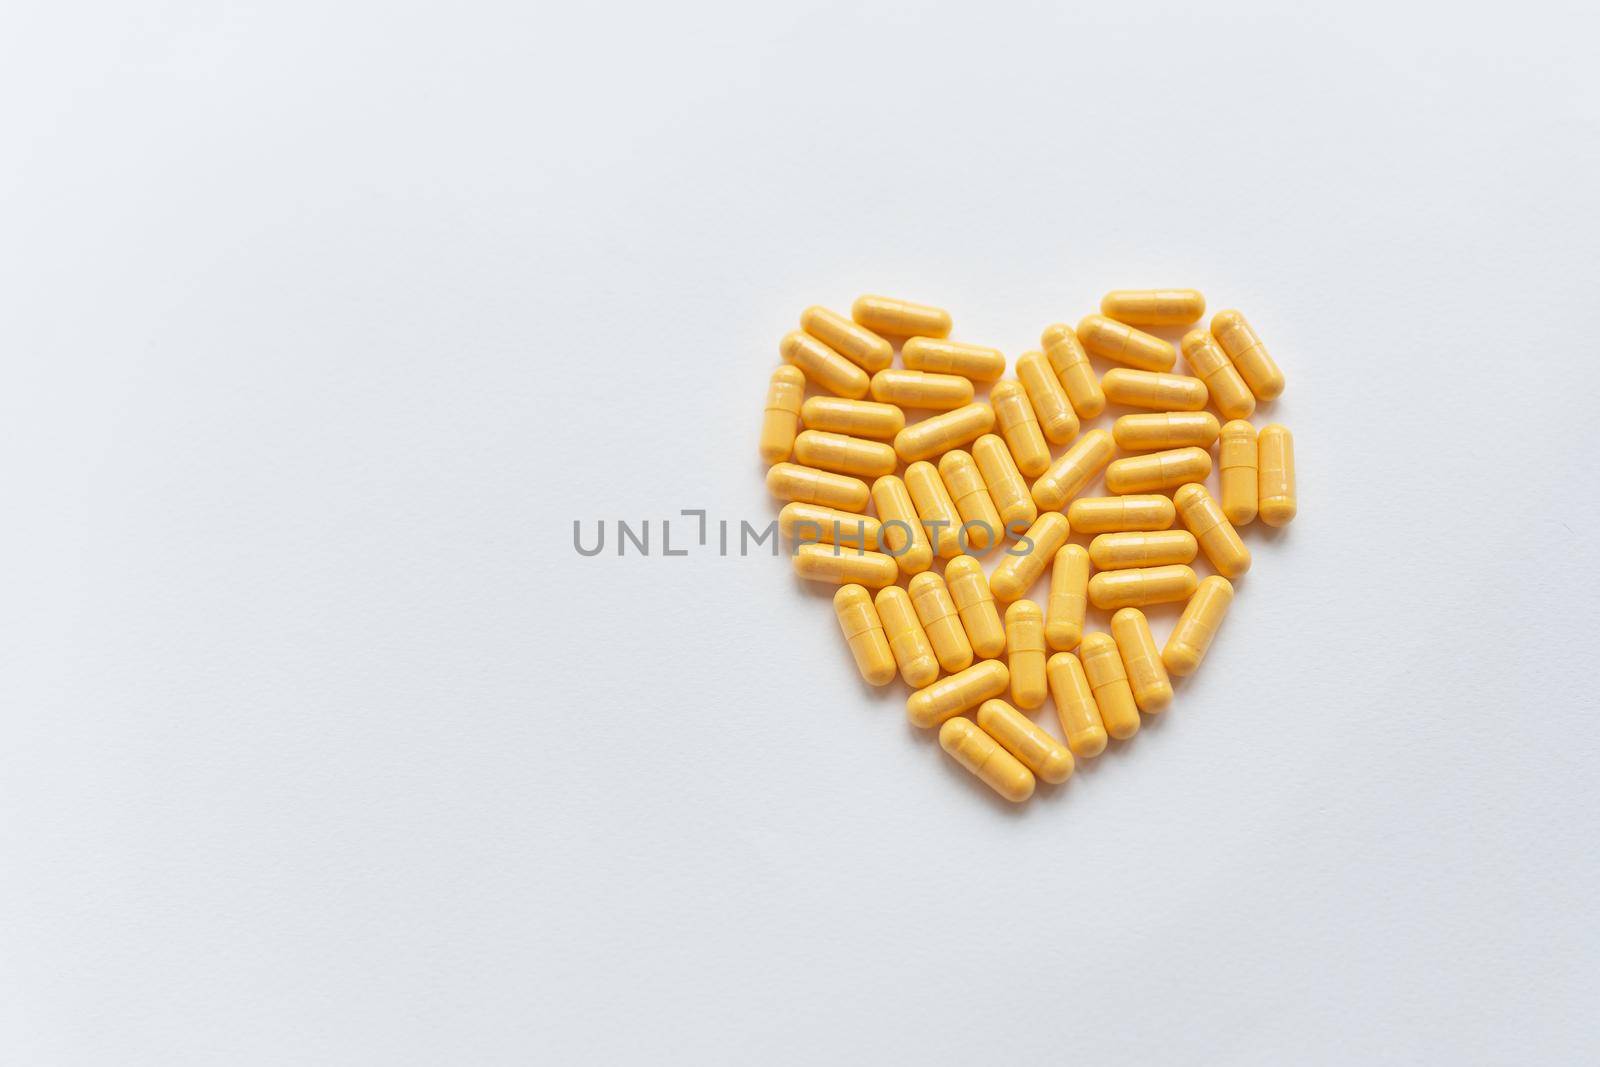 Heart shaped yellow pills, health and heart problems. Medicine and healthcare concept. Place for an inscription